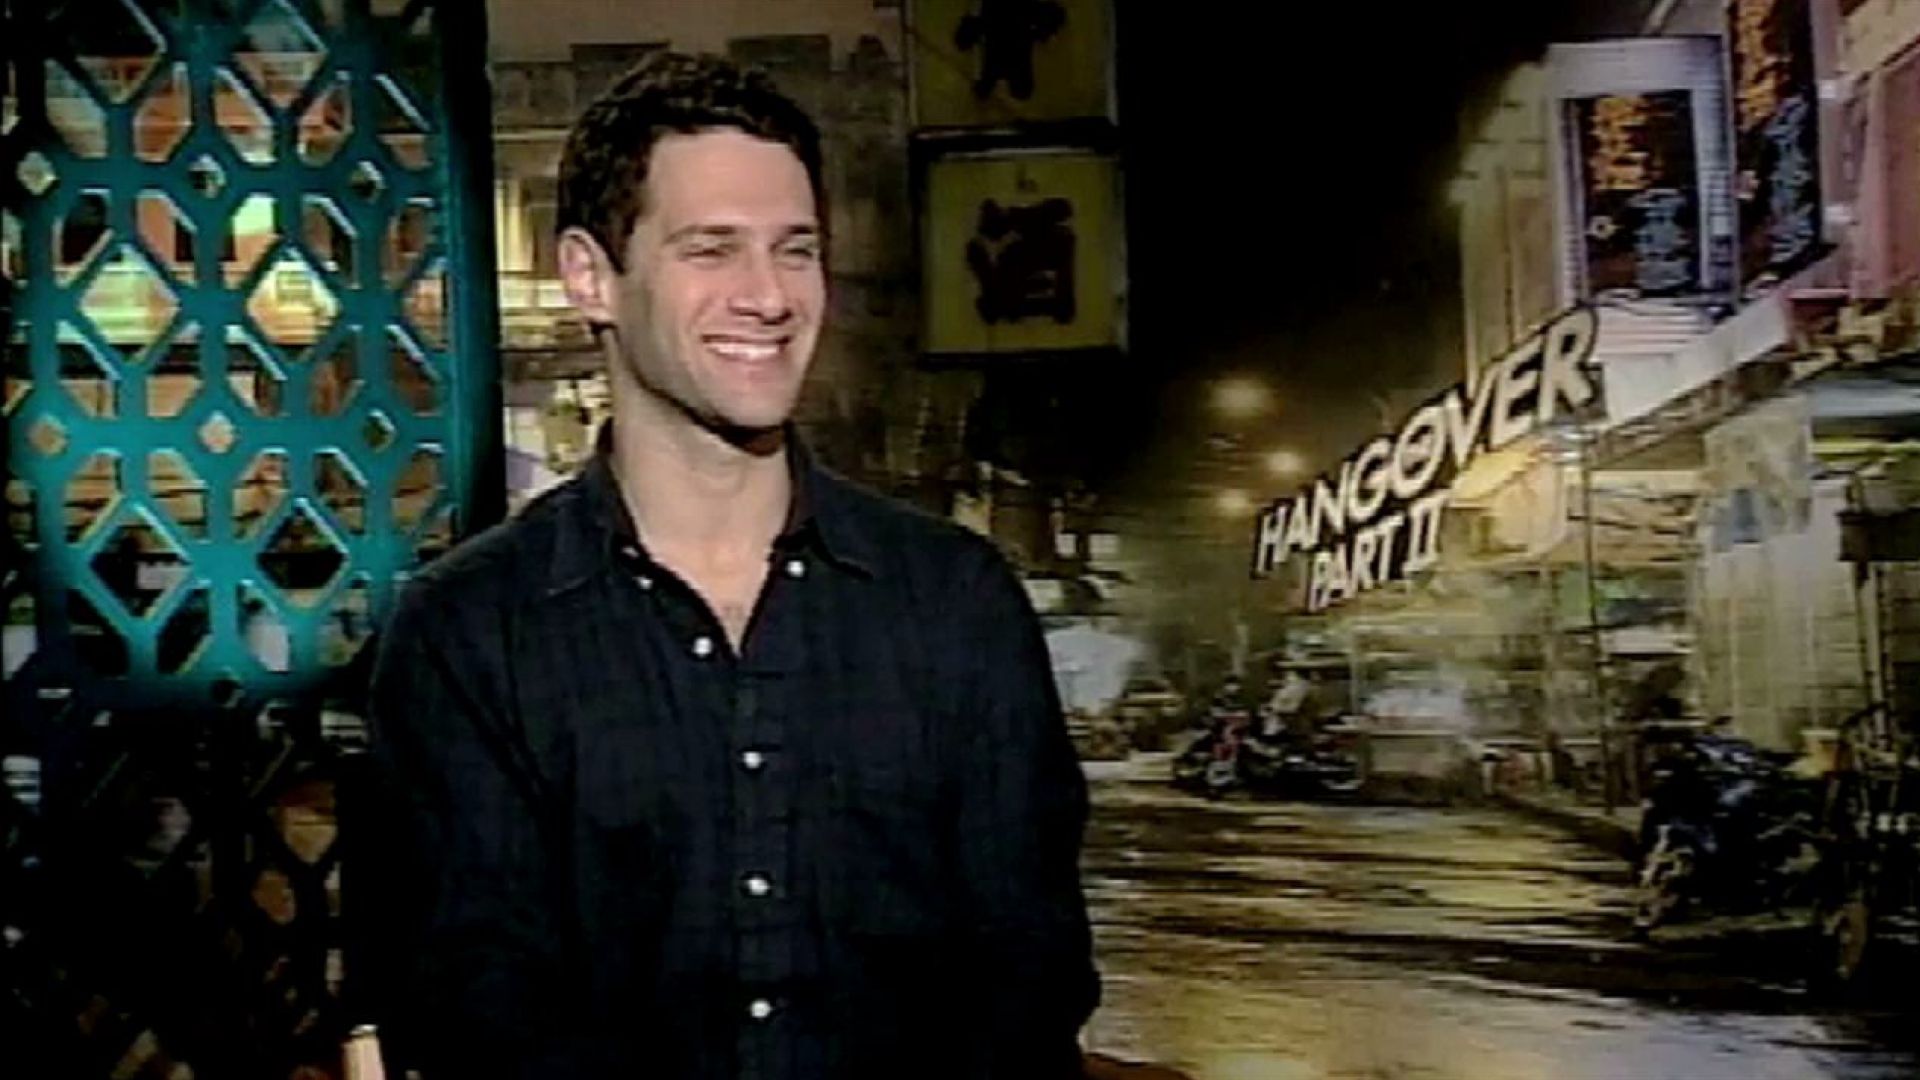 Justin Bartha talks about filming The Hangover 2 in Thailand